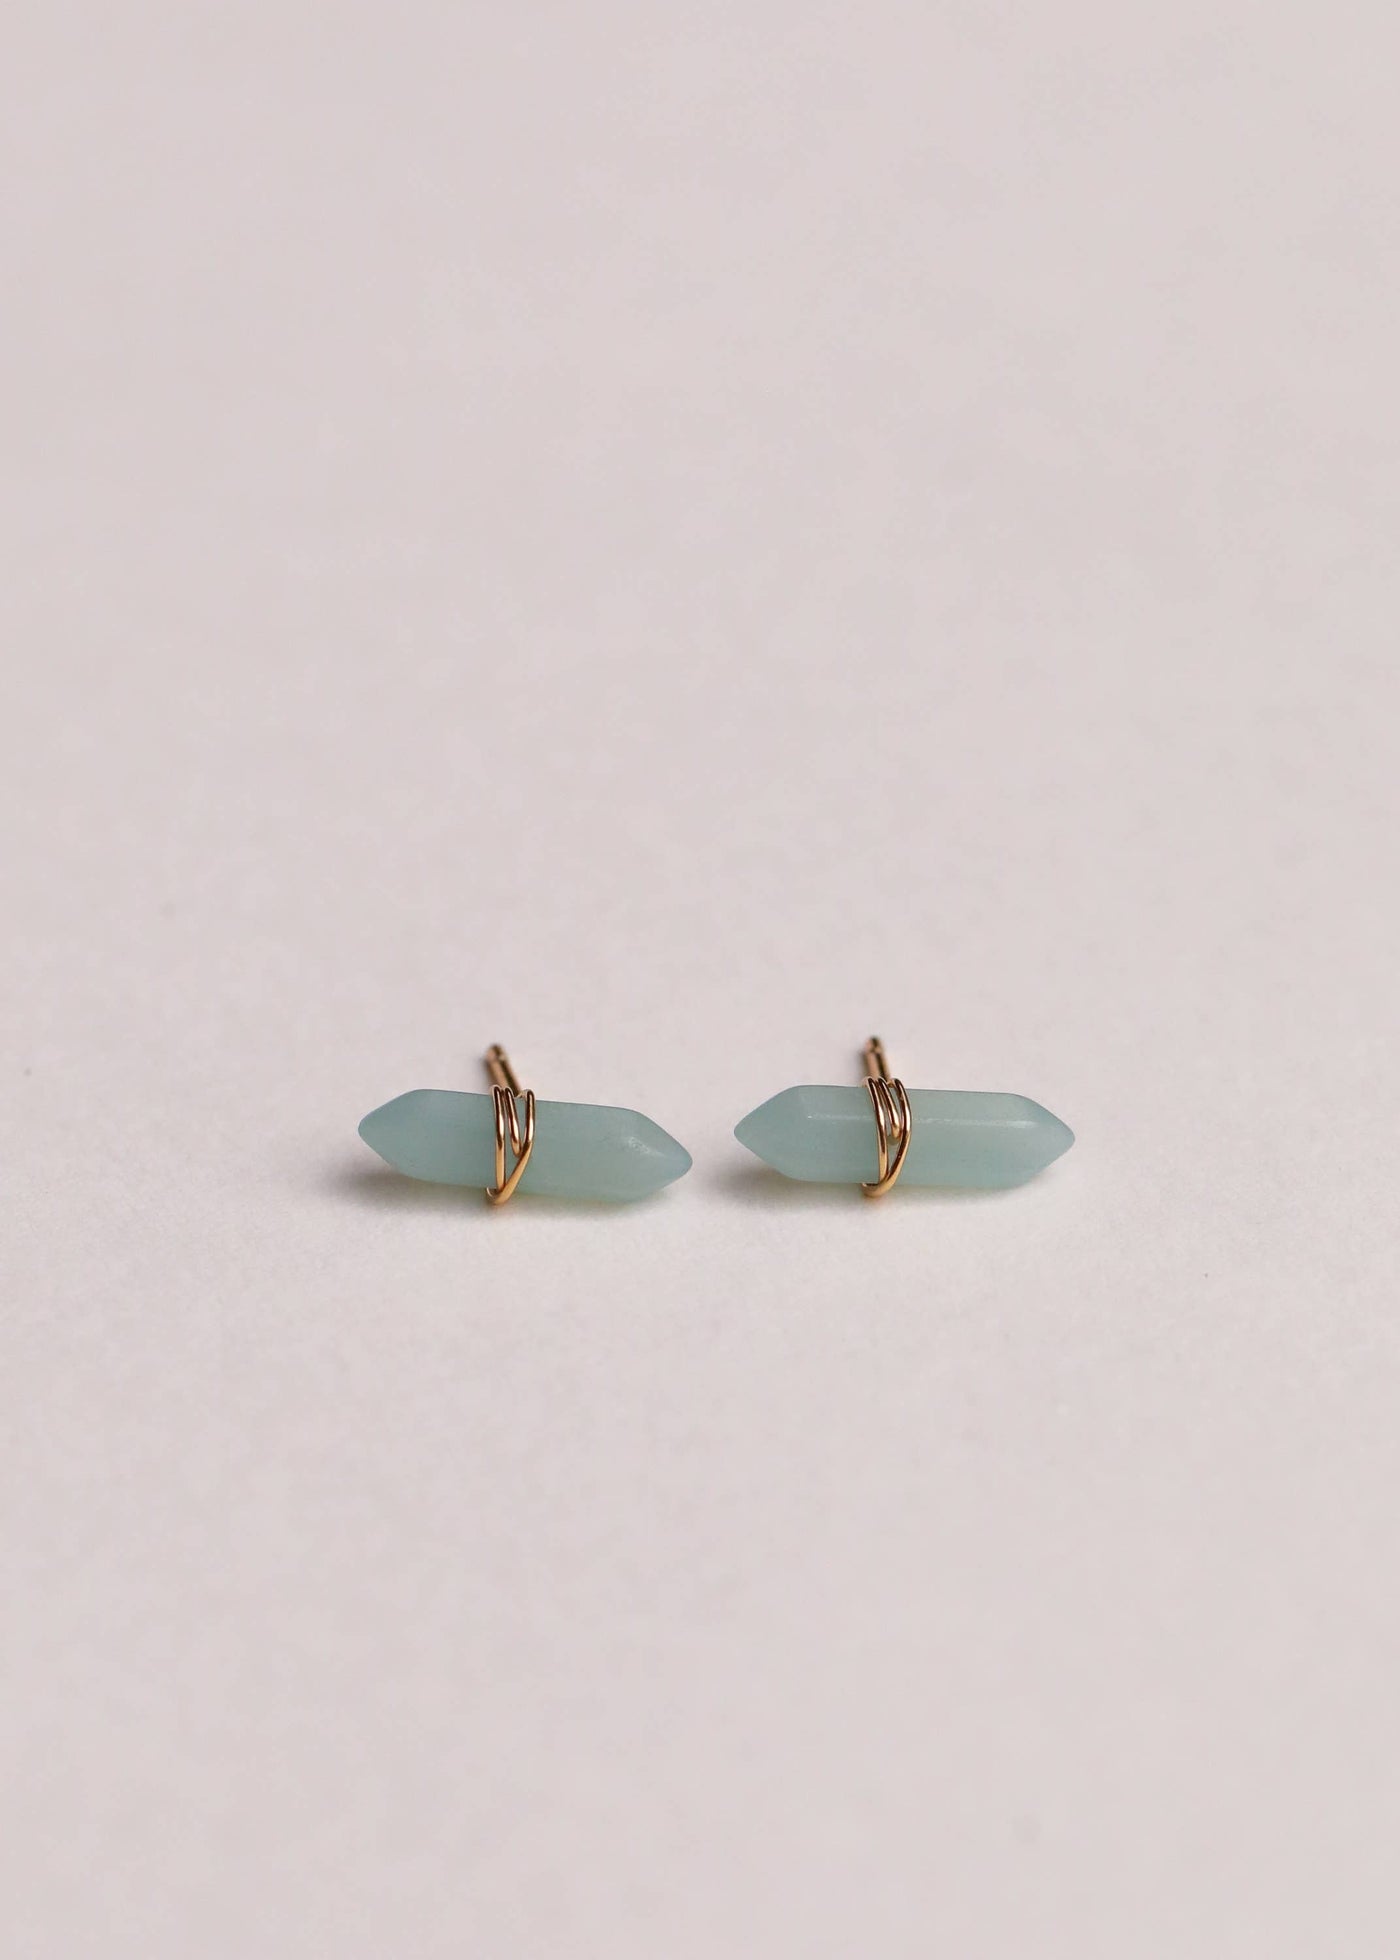 Amazonite Mineral Point - The Lake and Company